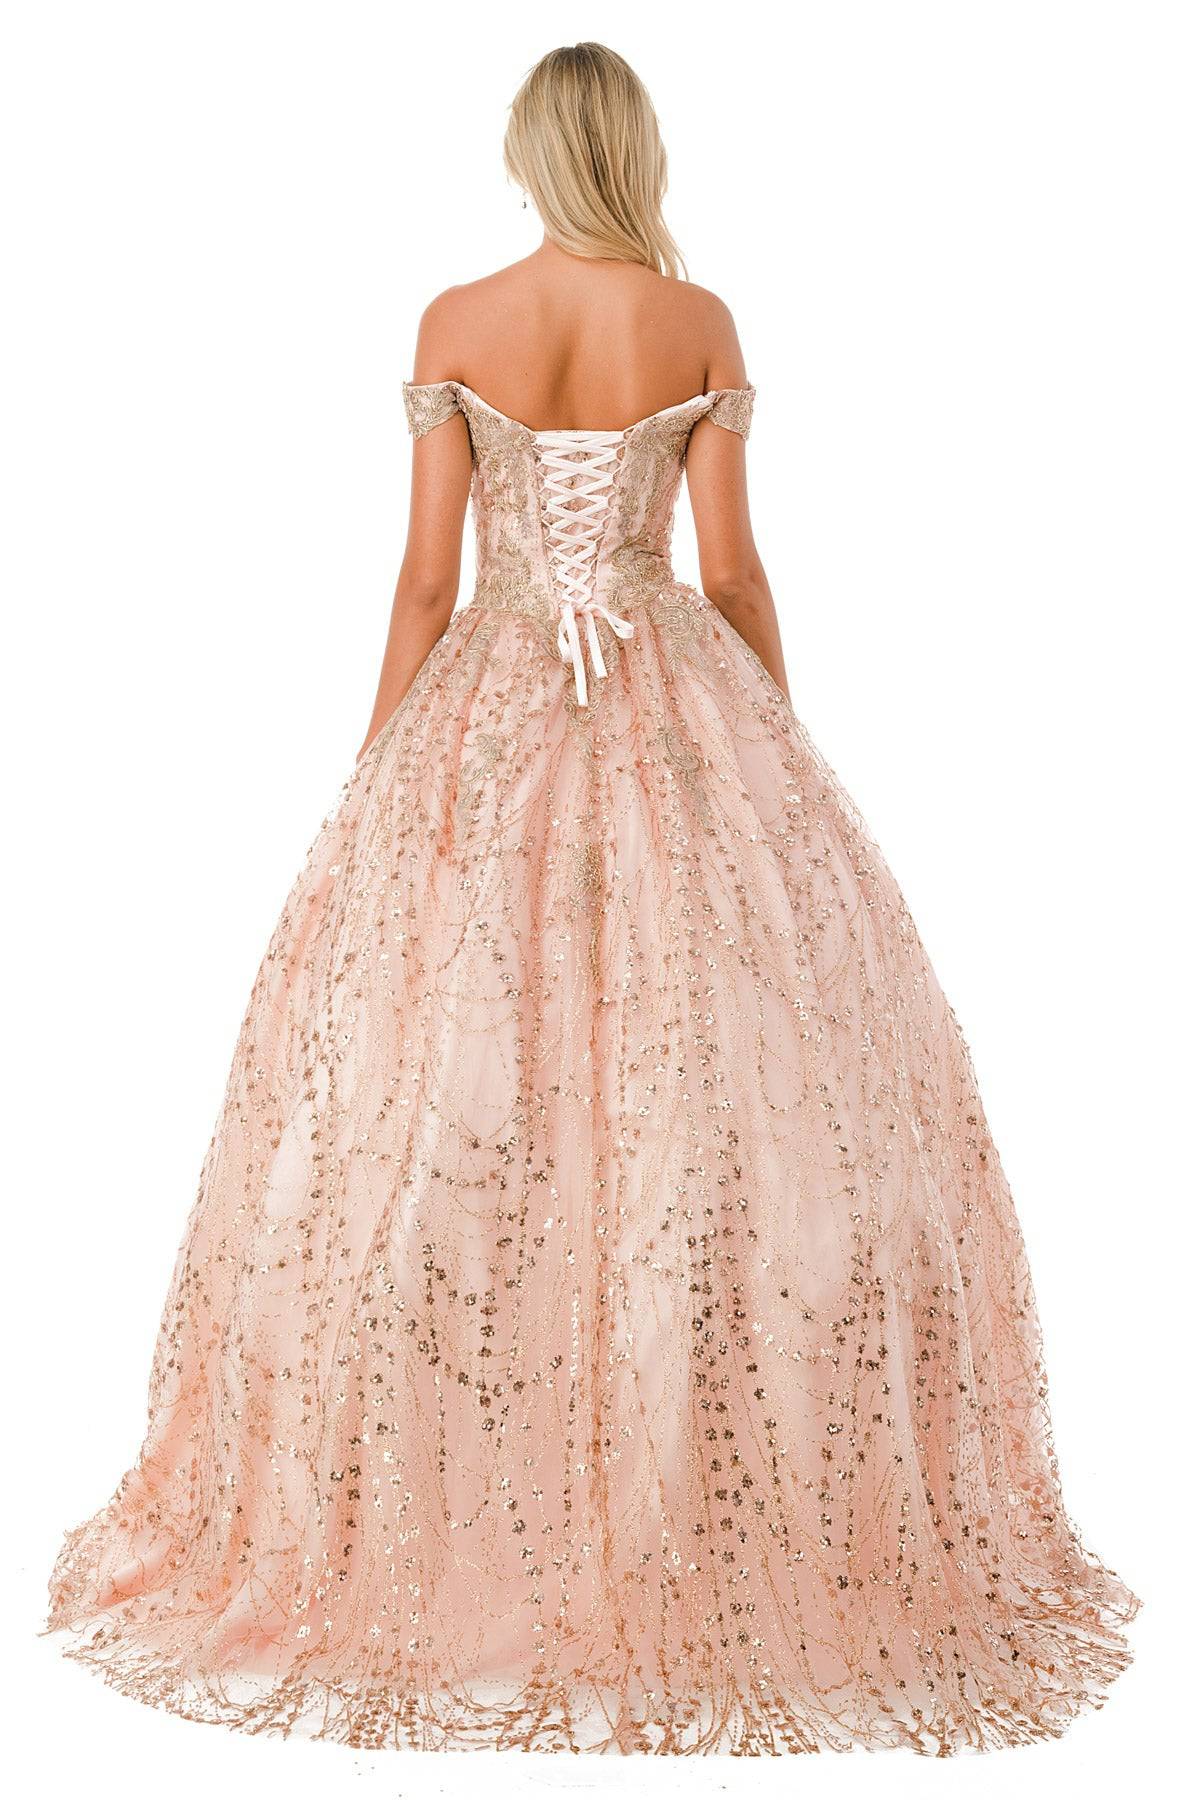 Aspeed L2753T Stunning Seqin Embroidered Ball Gown - NORMA REED